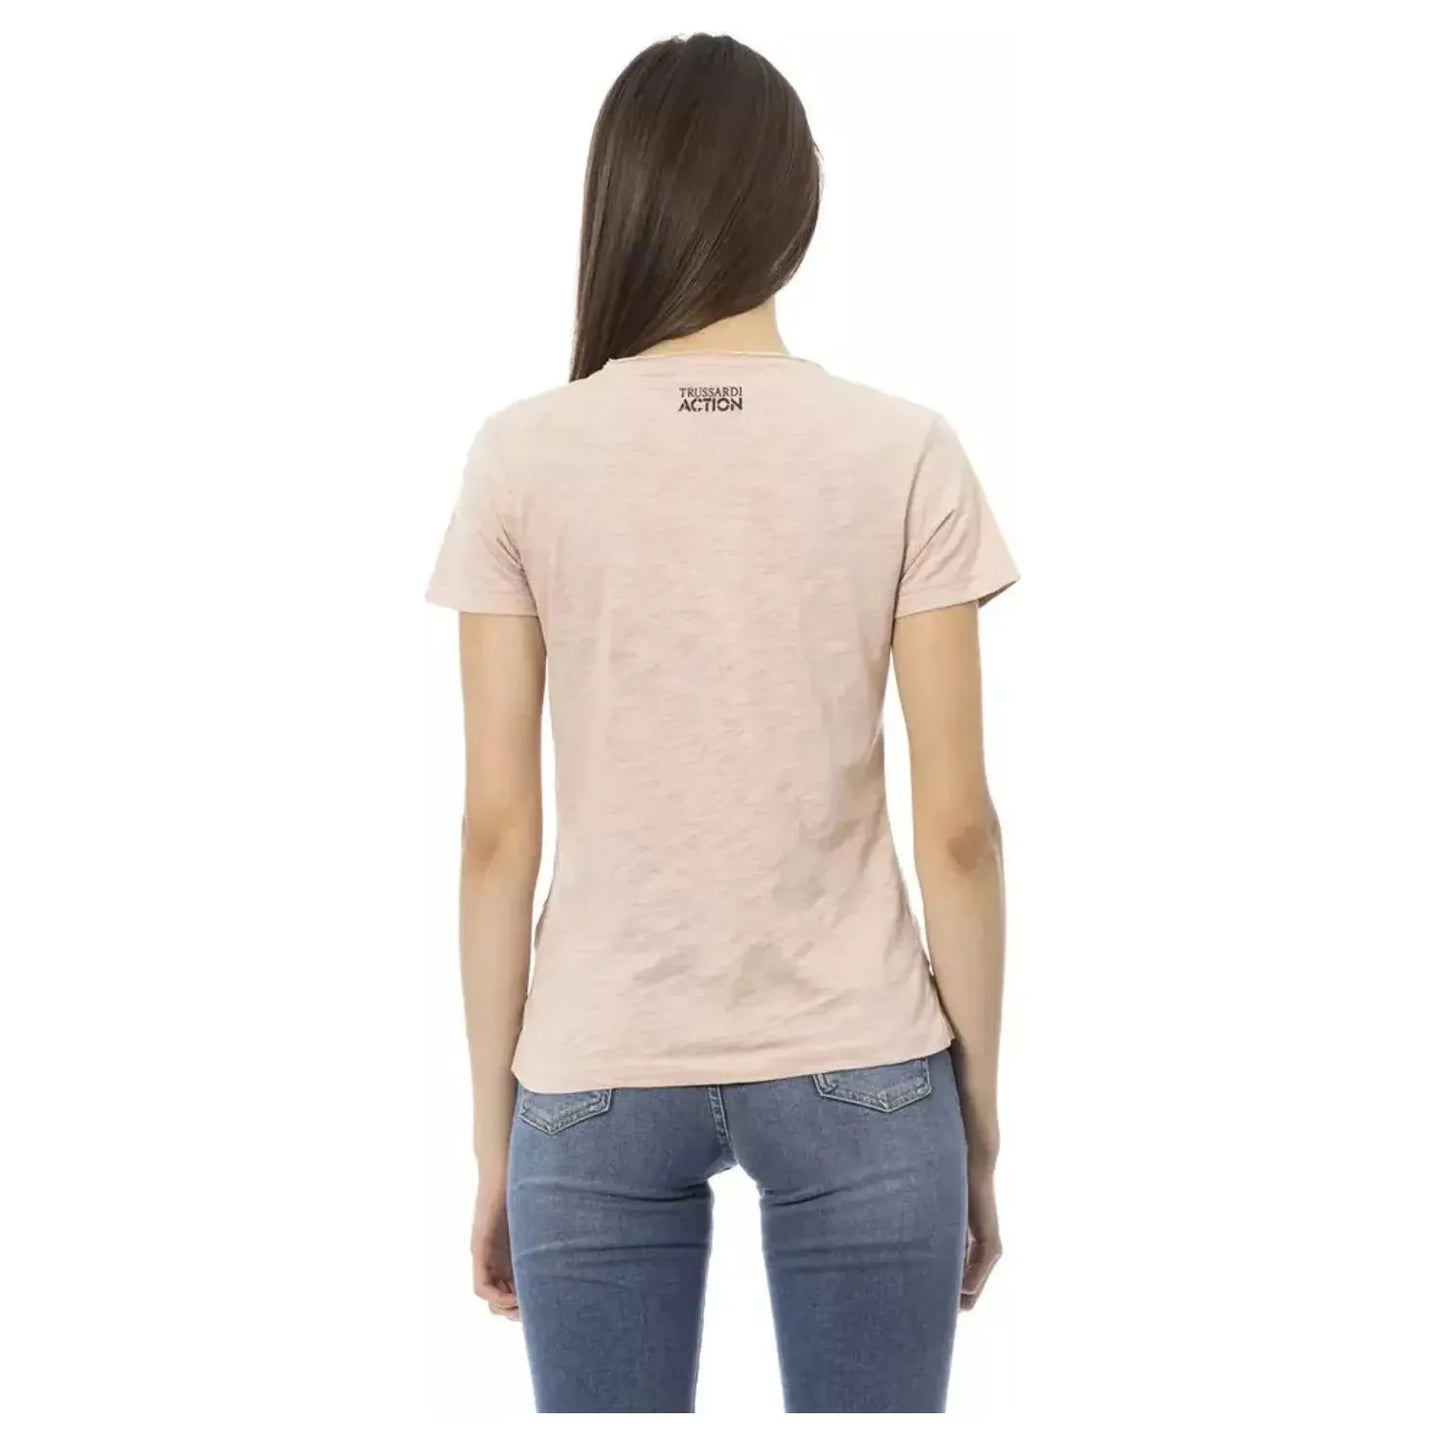 Trussardi Action Elegant Pink Short Sleeve Tee with Chic Print pink-cotton-tops-t-shirt-45